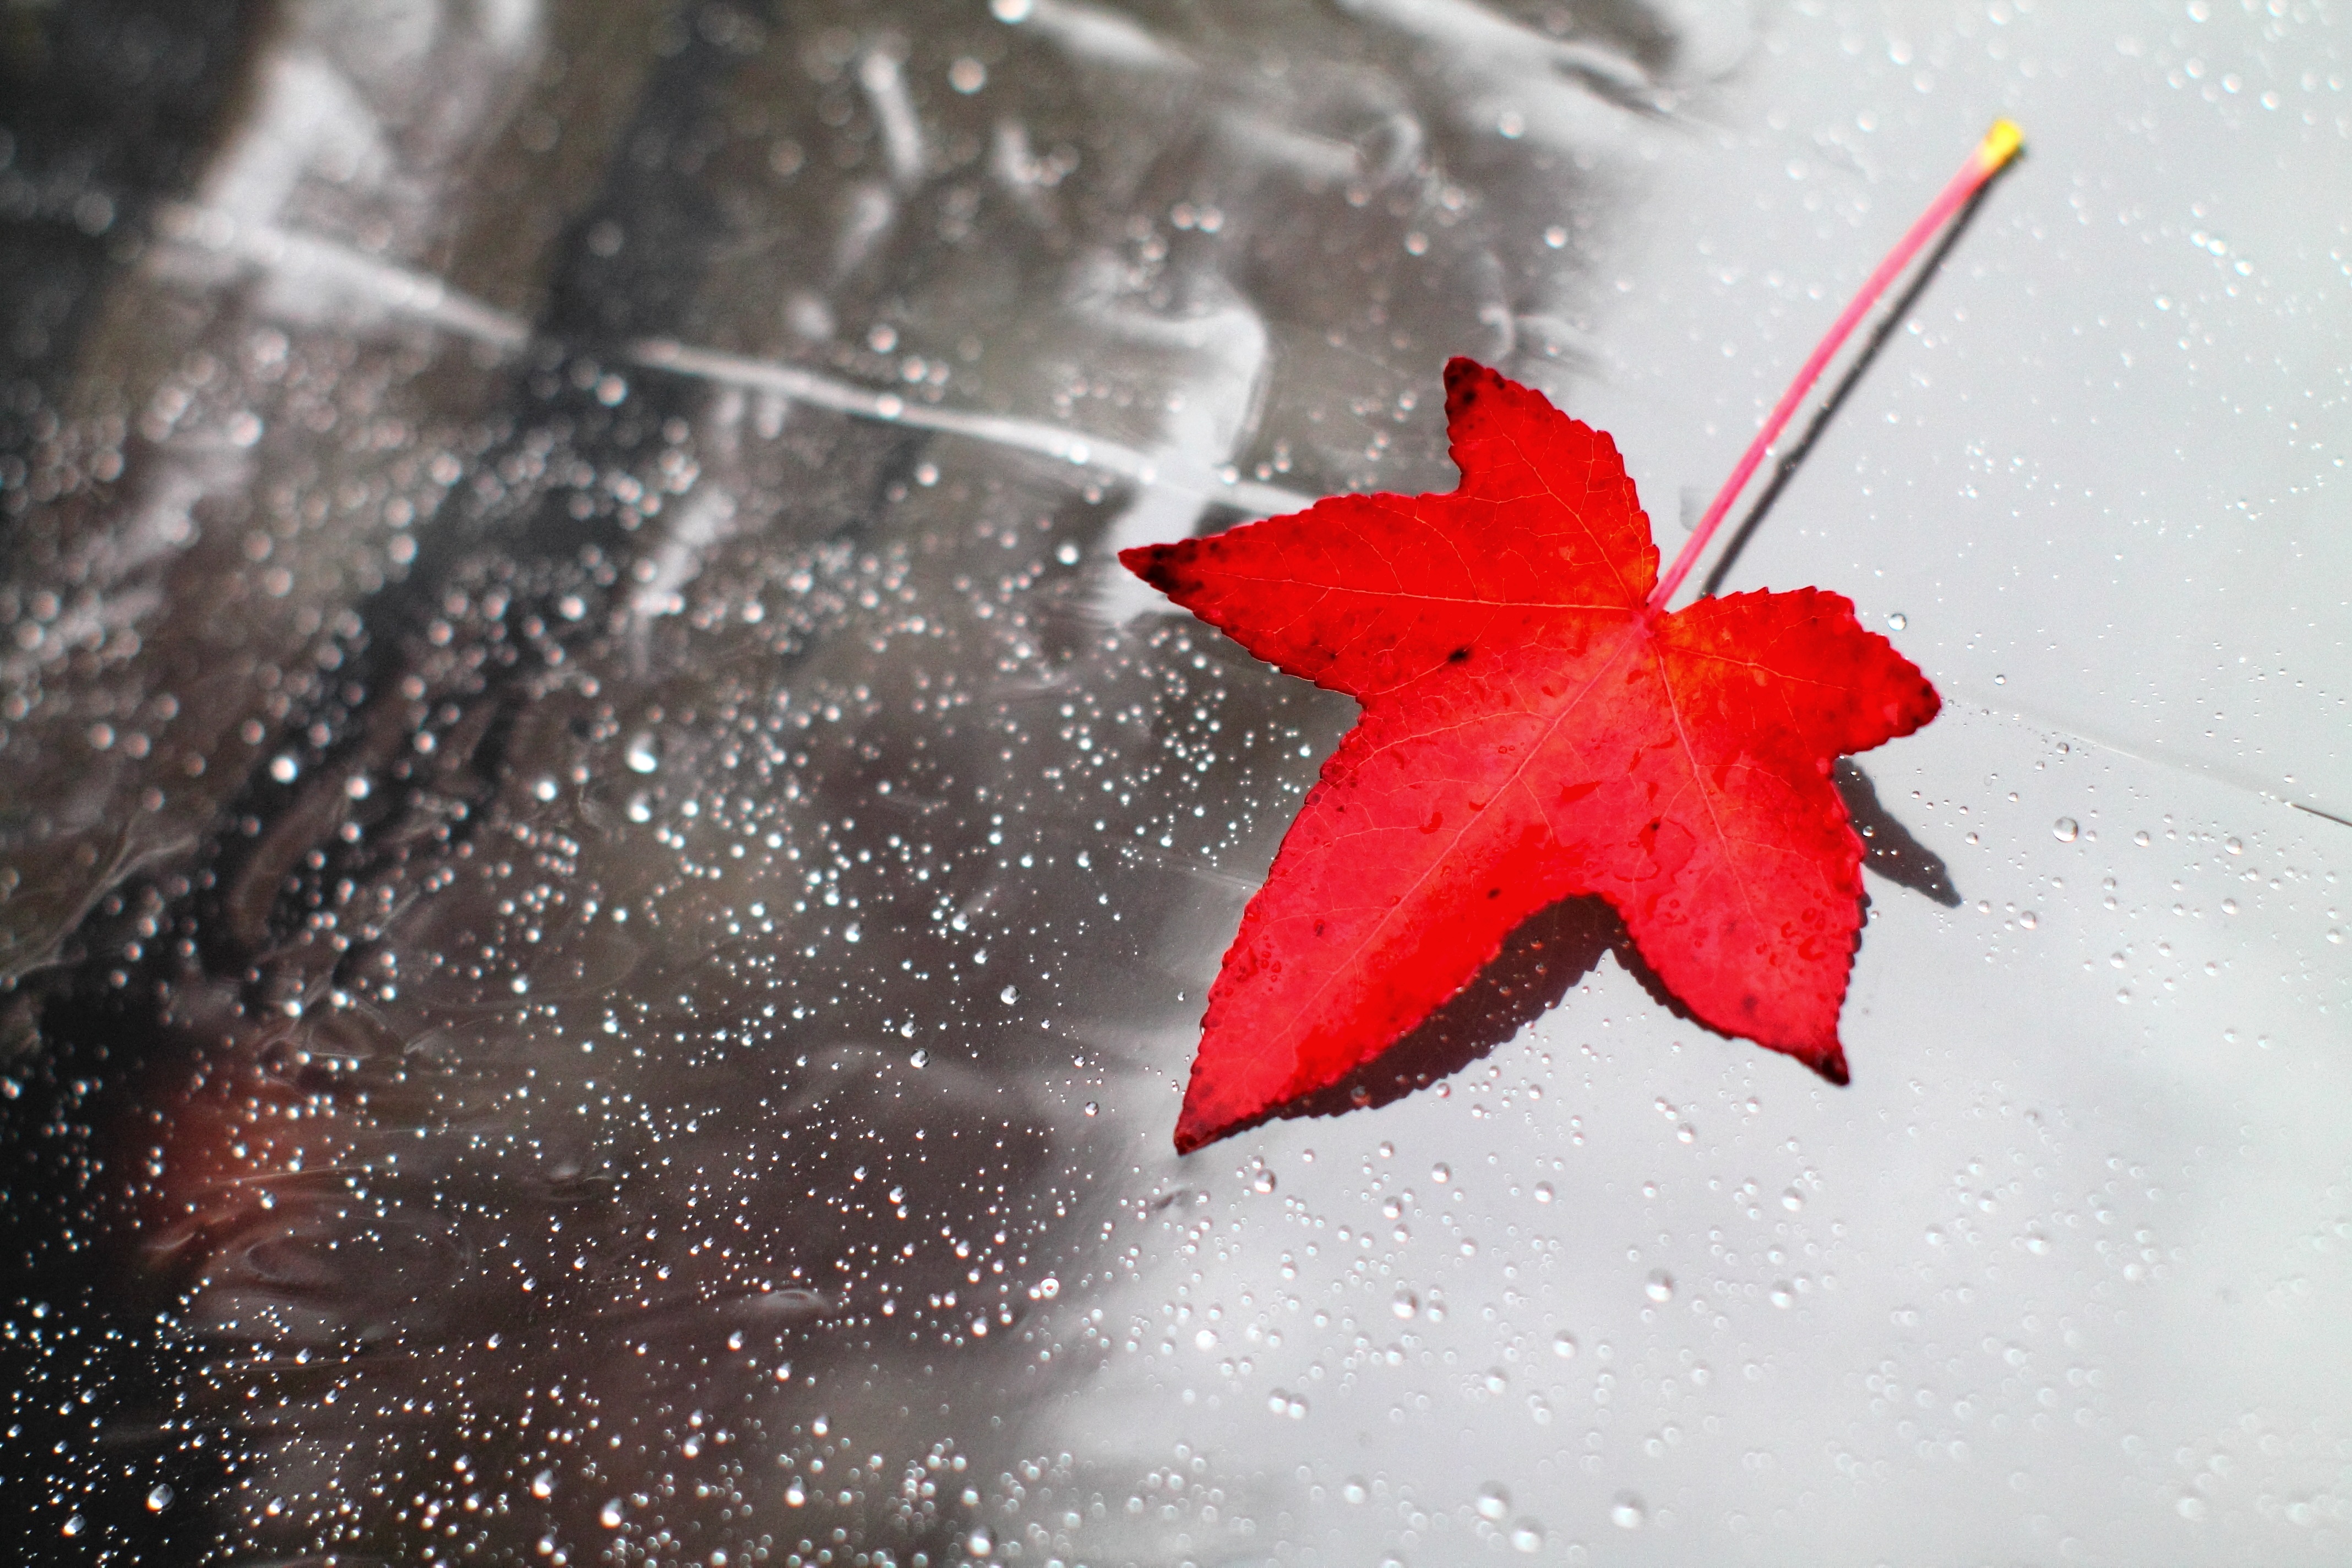 A vibrant red autumn leaf against a dewy background.